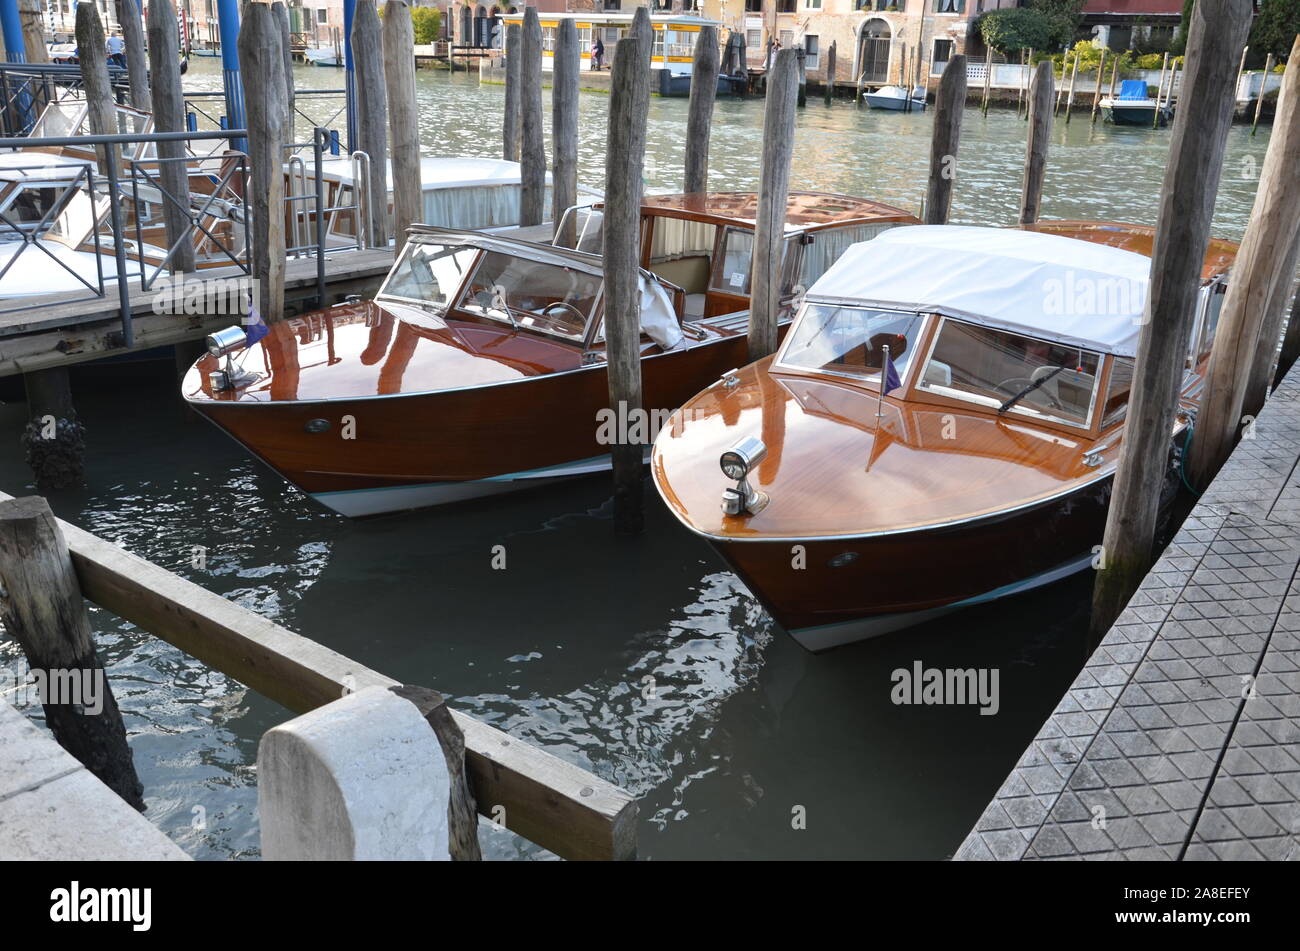 Motorboats on the Grand Canal, Venice Stock Photo